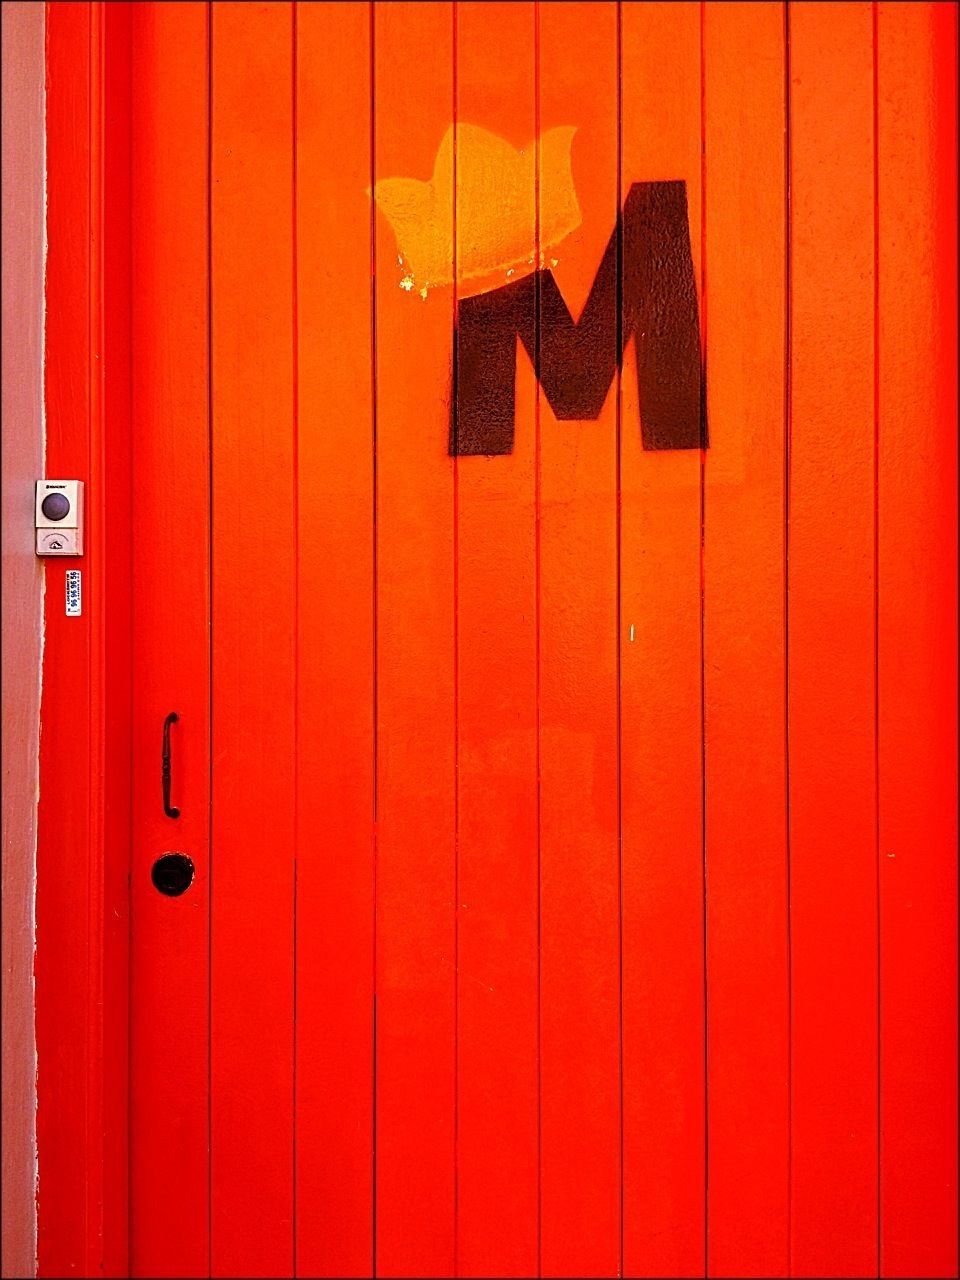 red, door, closed, full frame, built structure, wall - building feature, safety, architecture, protection, wood - material, close-up, orange color, backgrounds, building exterior, security, vibrant color, wall, wooden, pattern, entrance